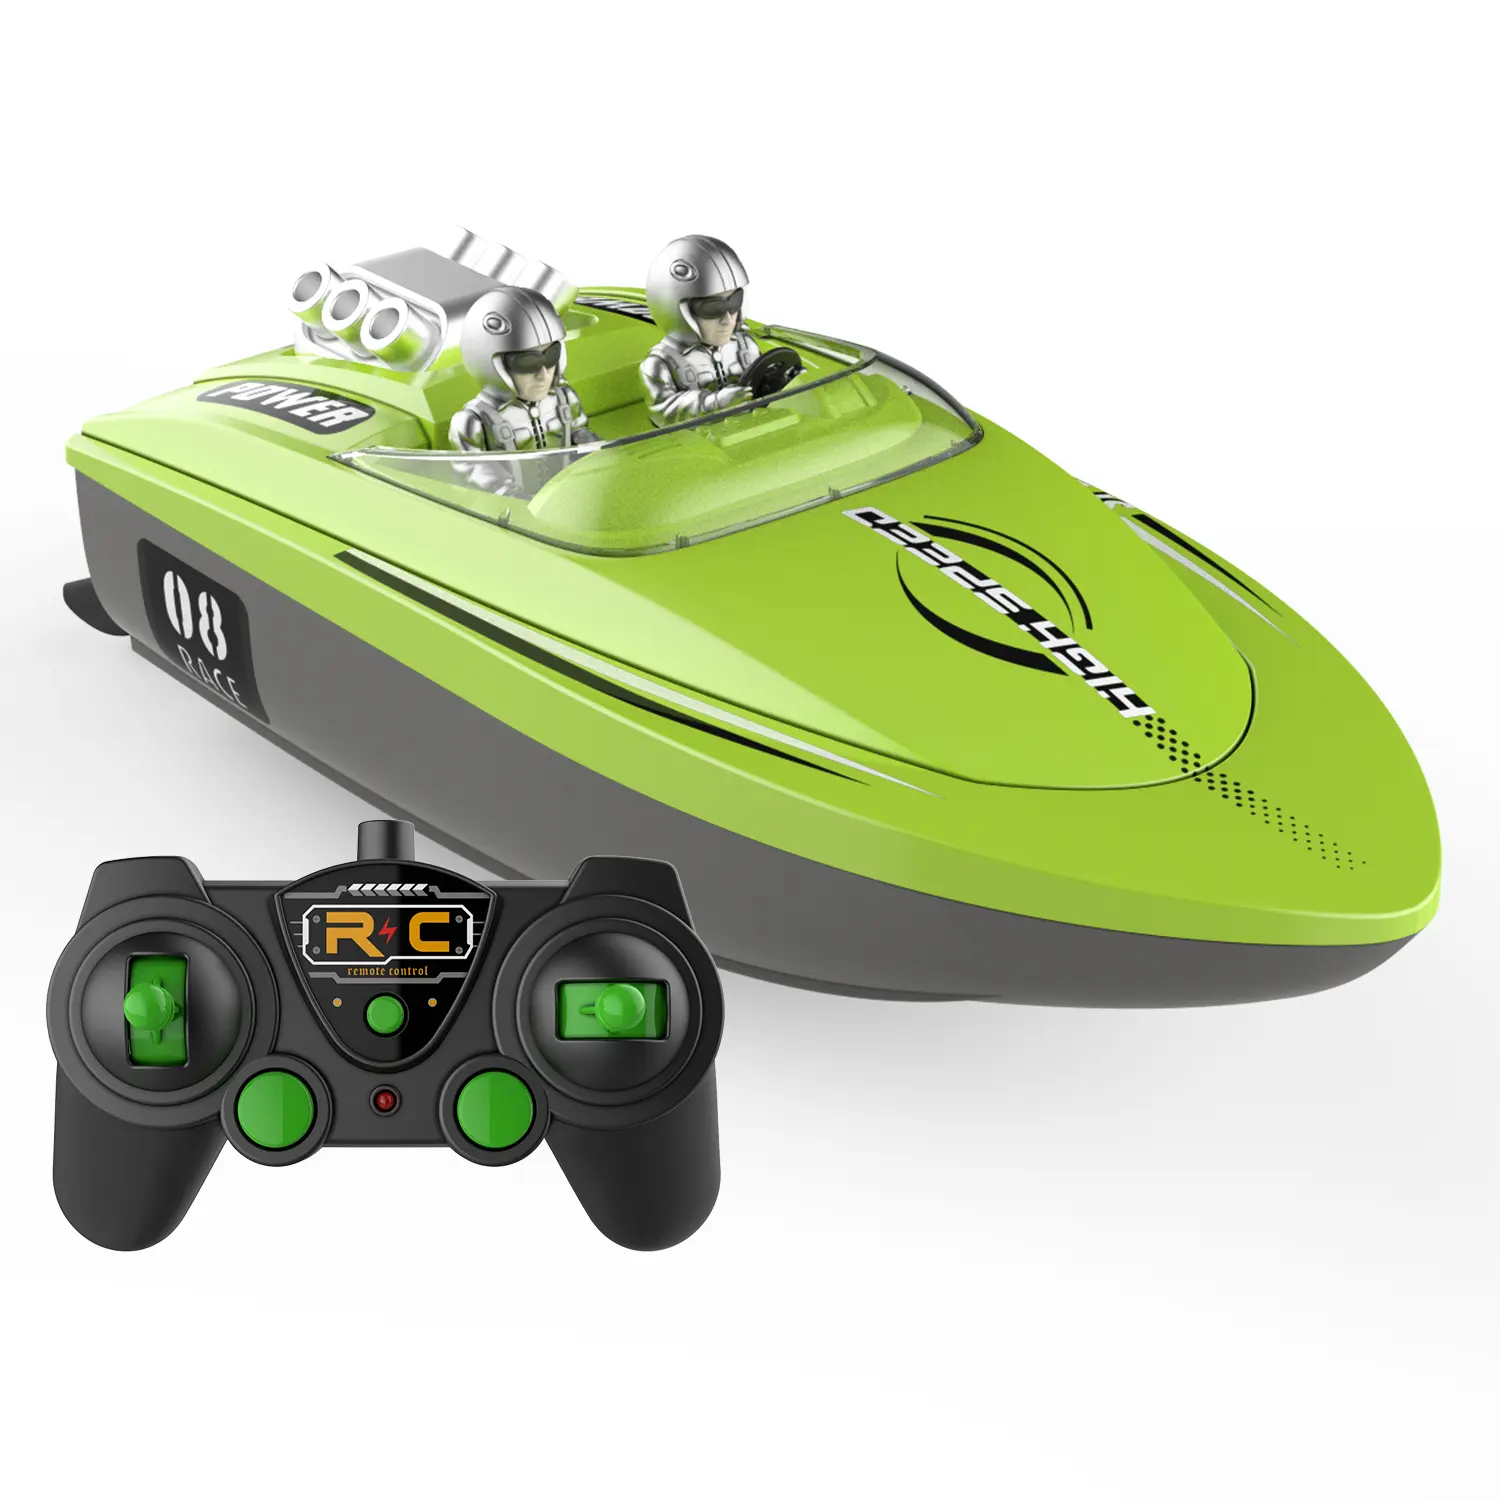 Customized Waterproof Jumping Boat Cool Water Wireless RC Racing Boat Toys For Kids Gift